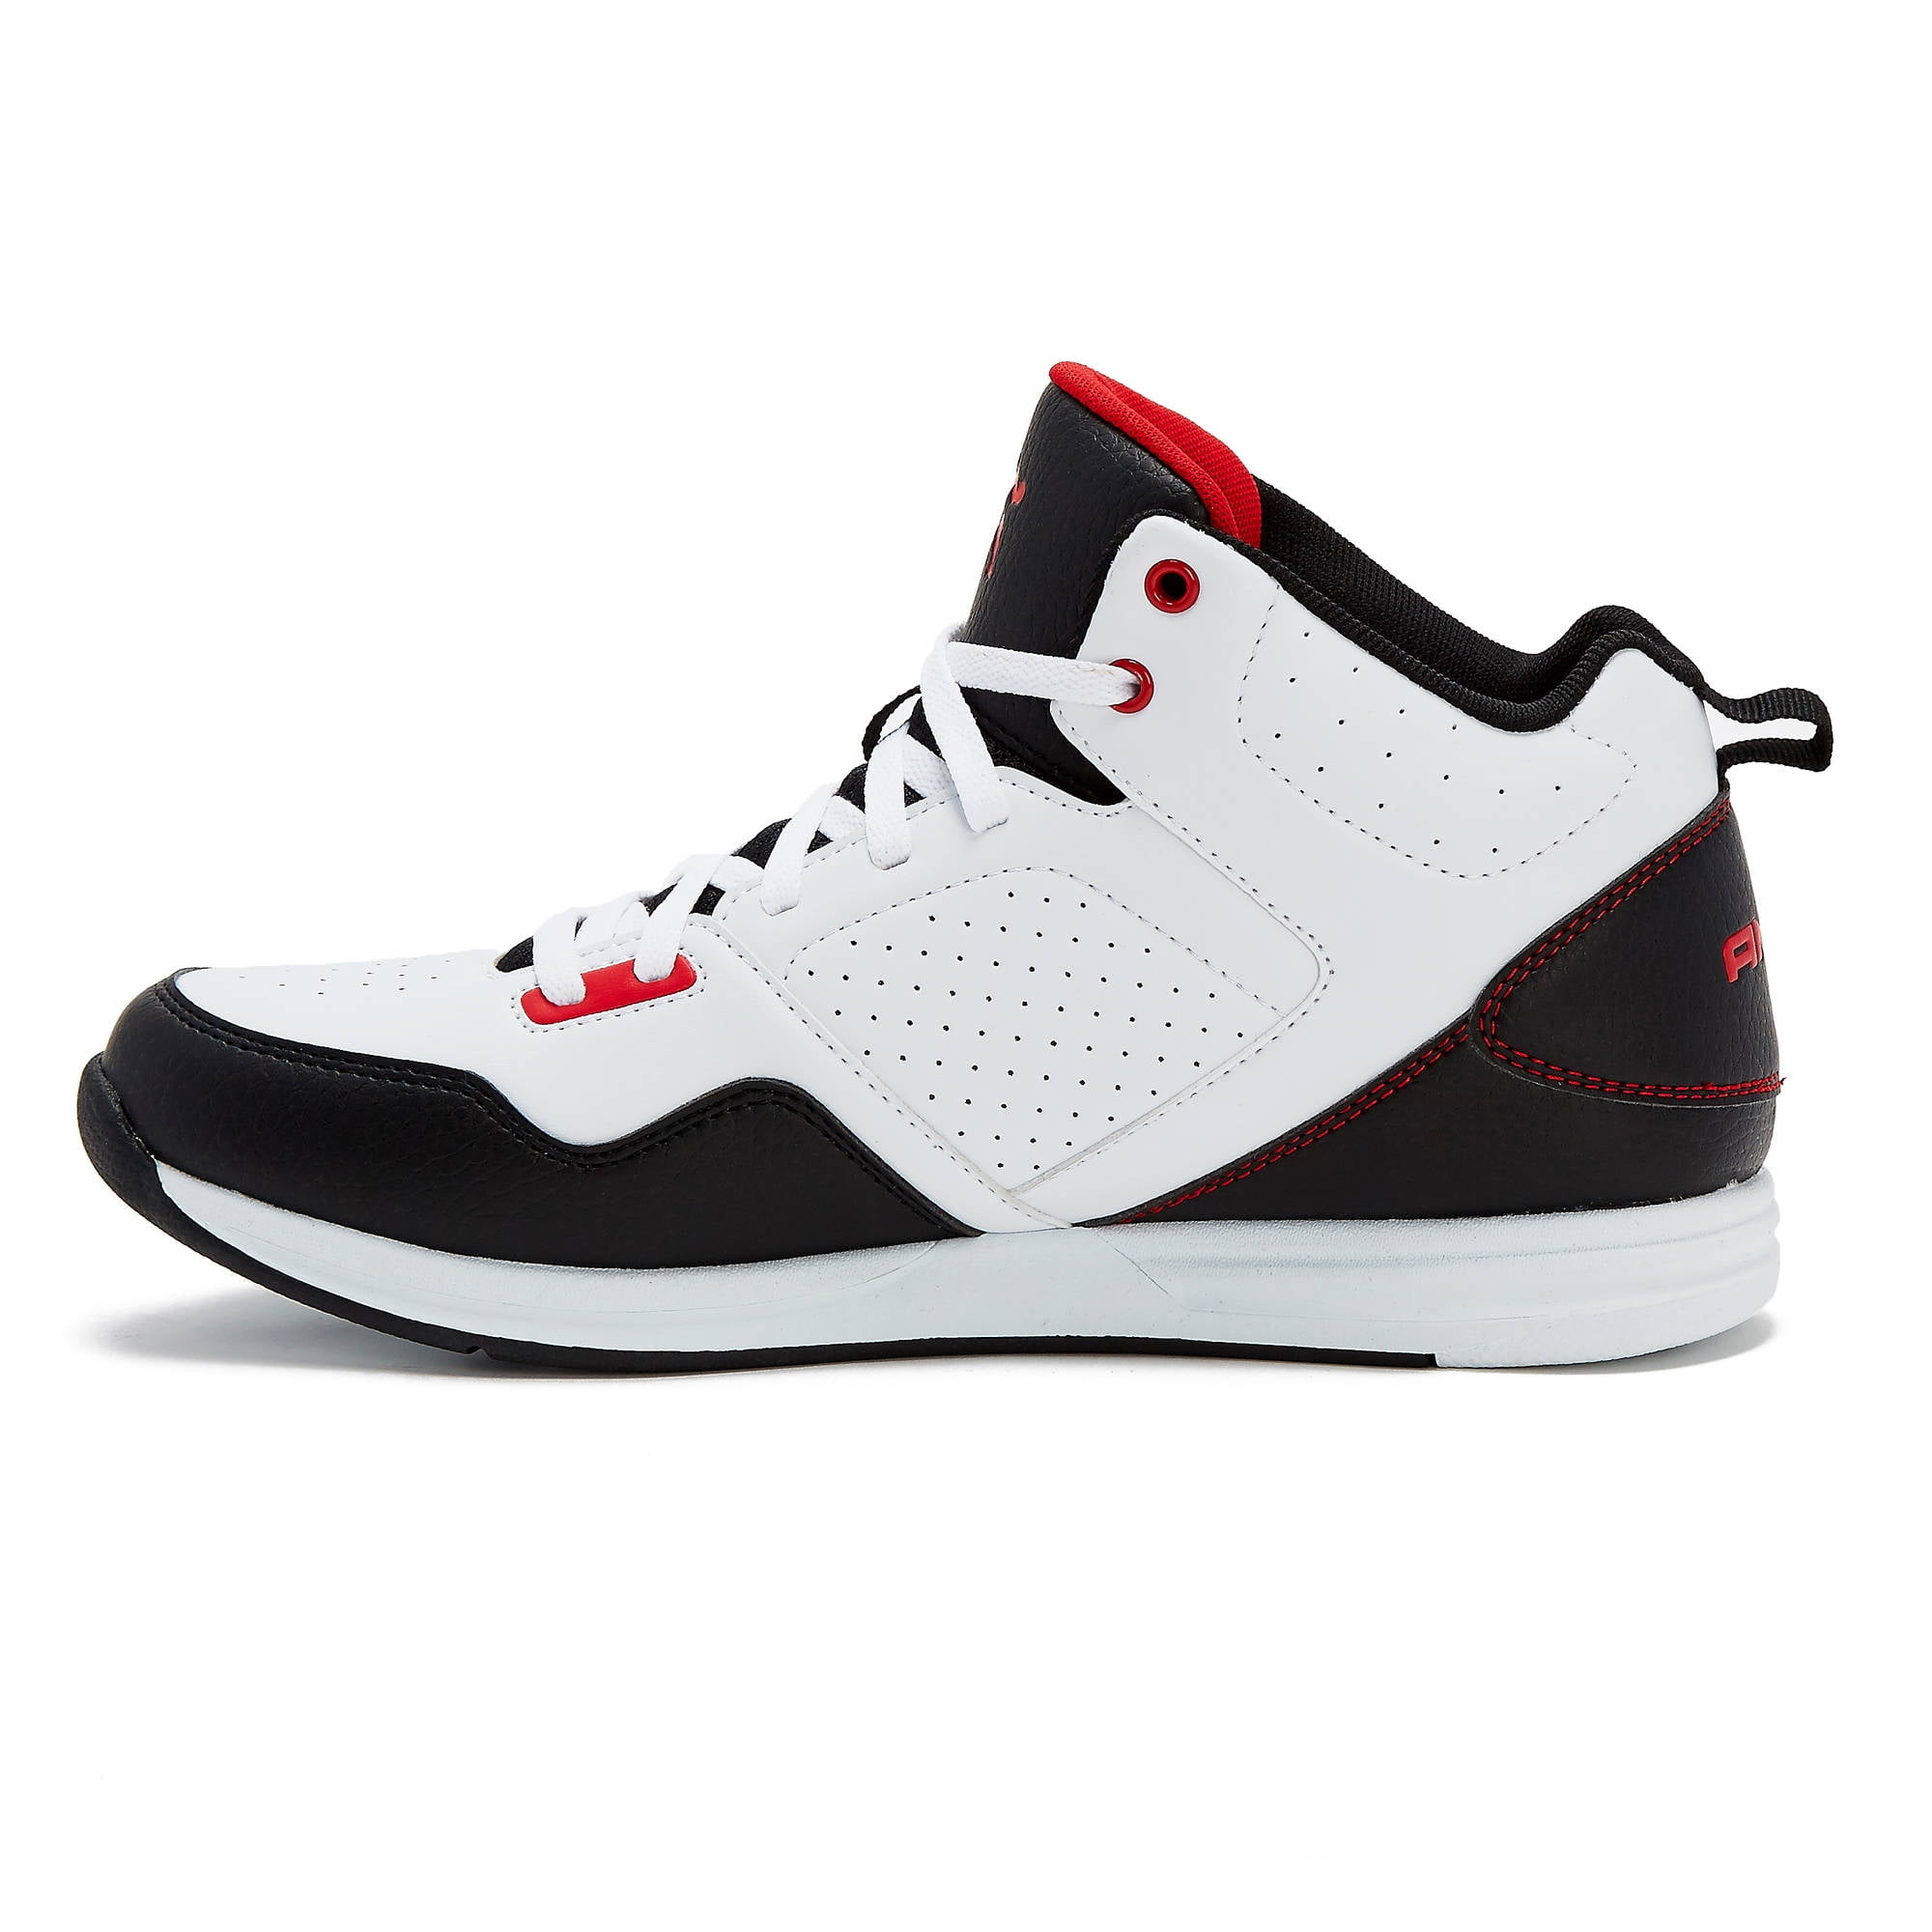 AND1 - Men's Capital Athletic Shoe 